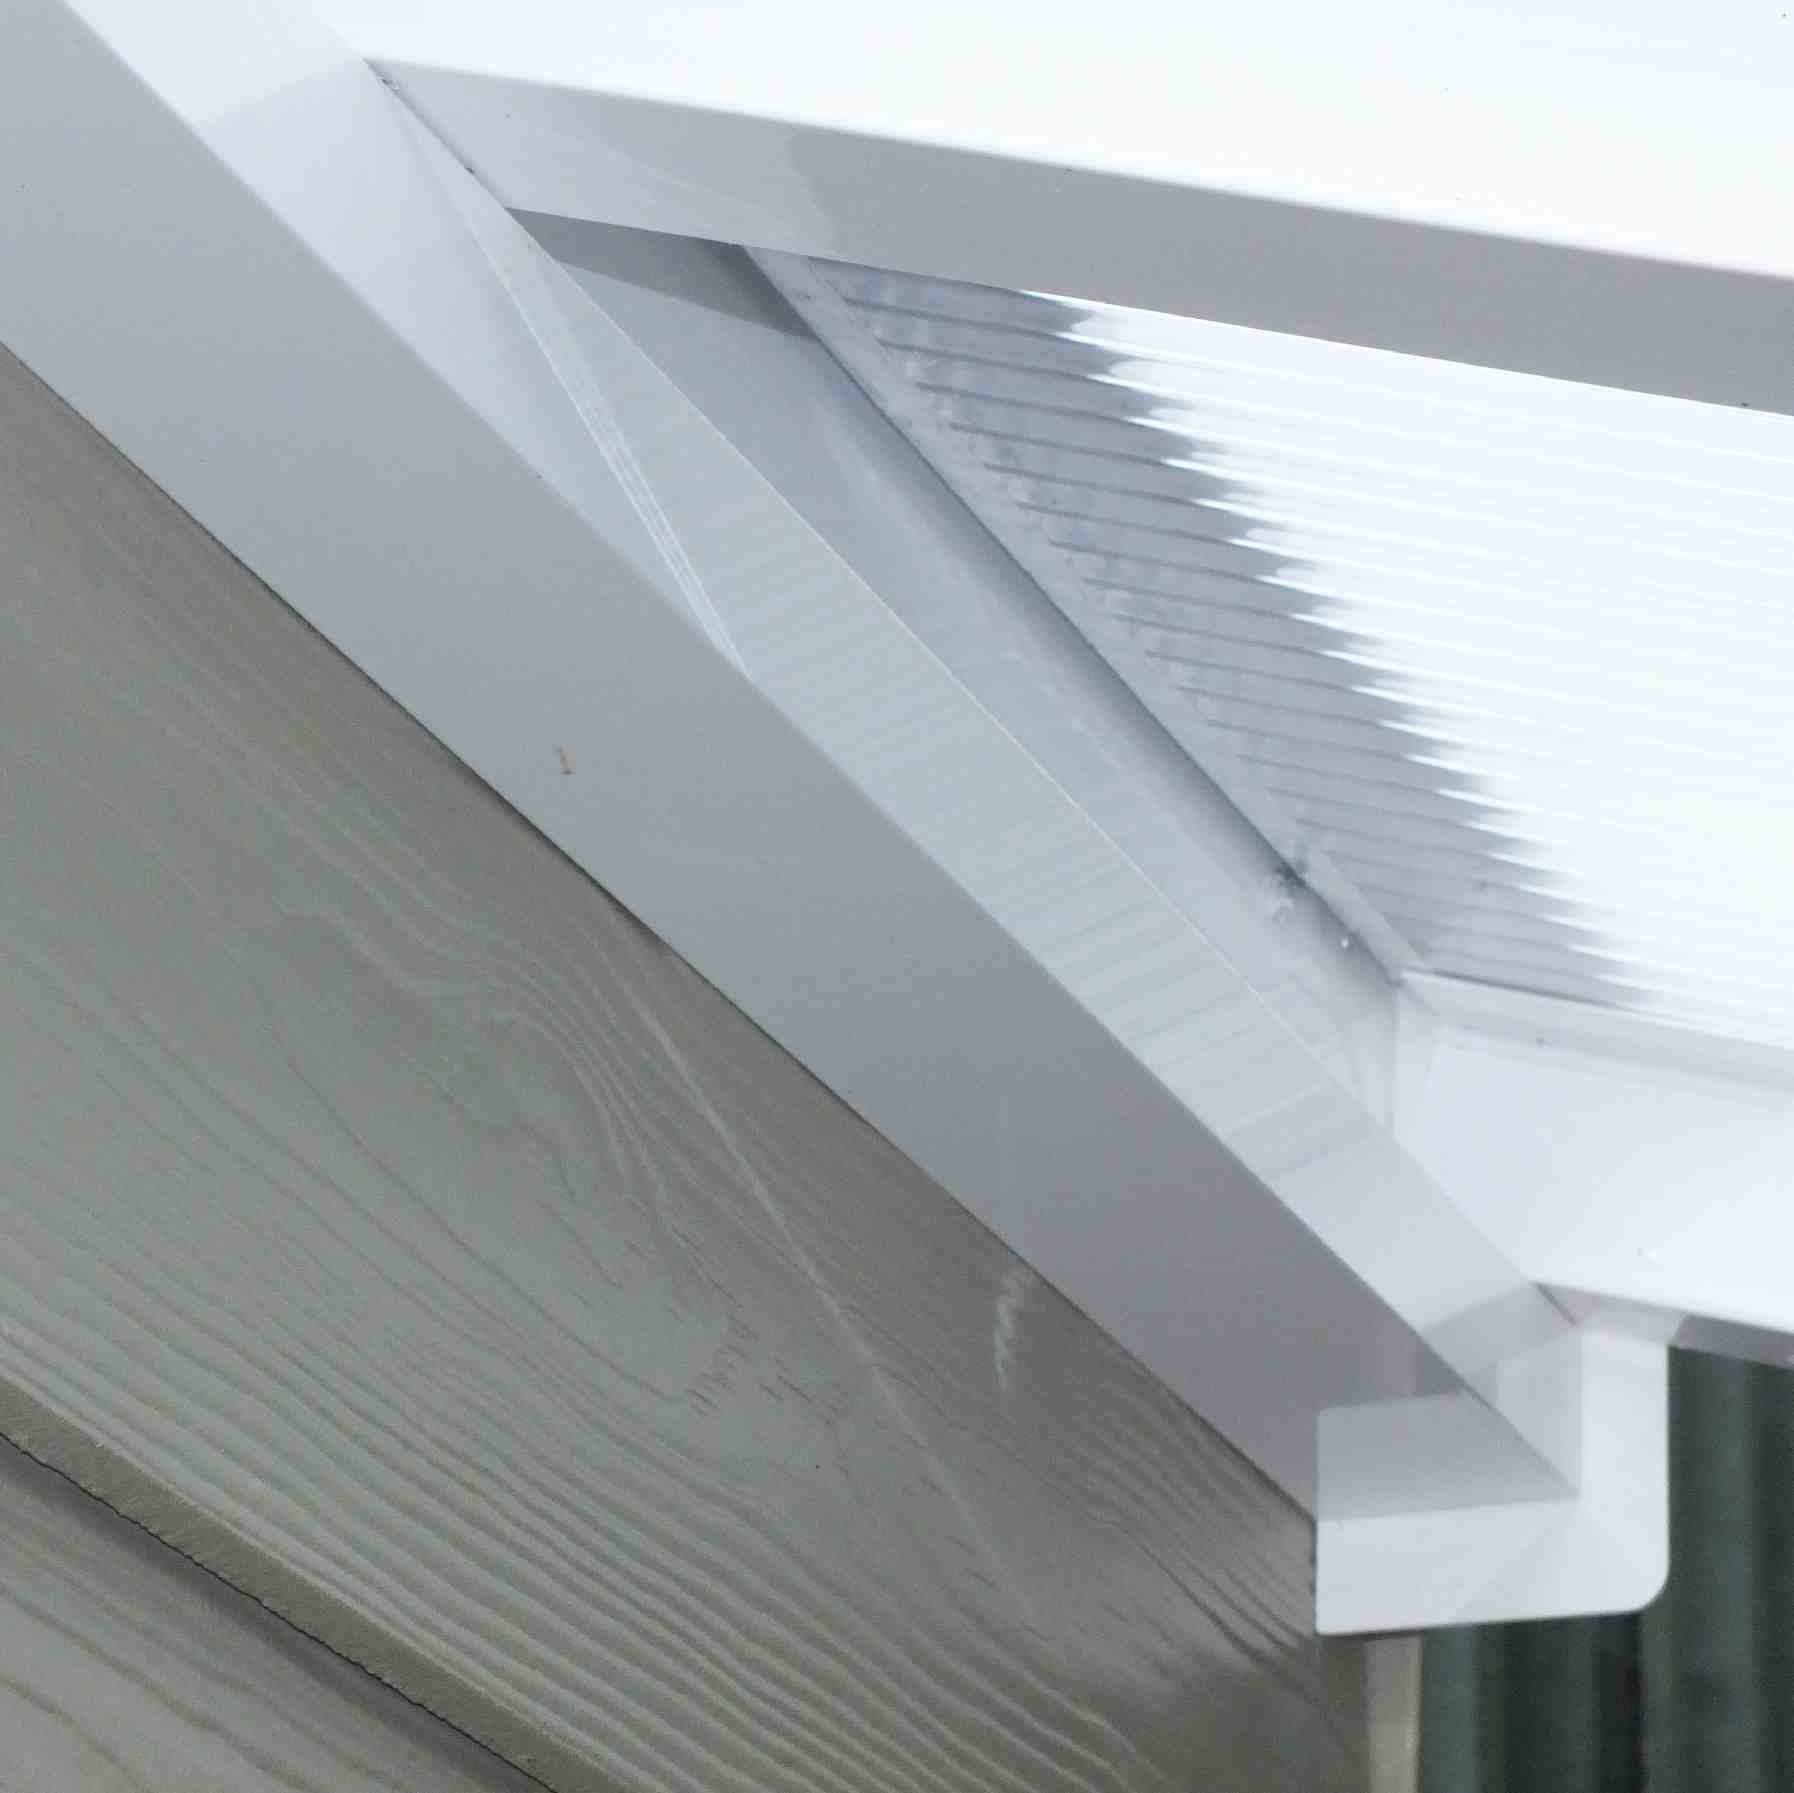 Great deals on Omega Verandah White with 16mm Polycarbonate Glazing - 12.0m (W) x 4.5m (P), (5) Supporting Posts